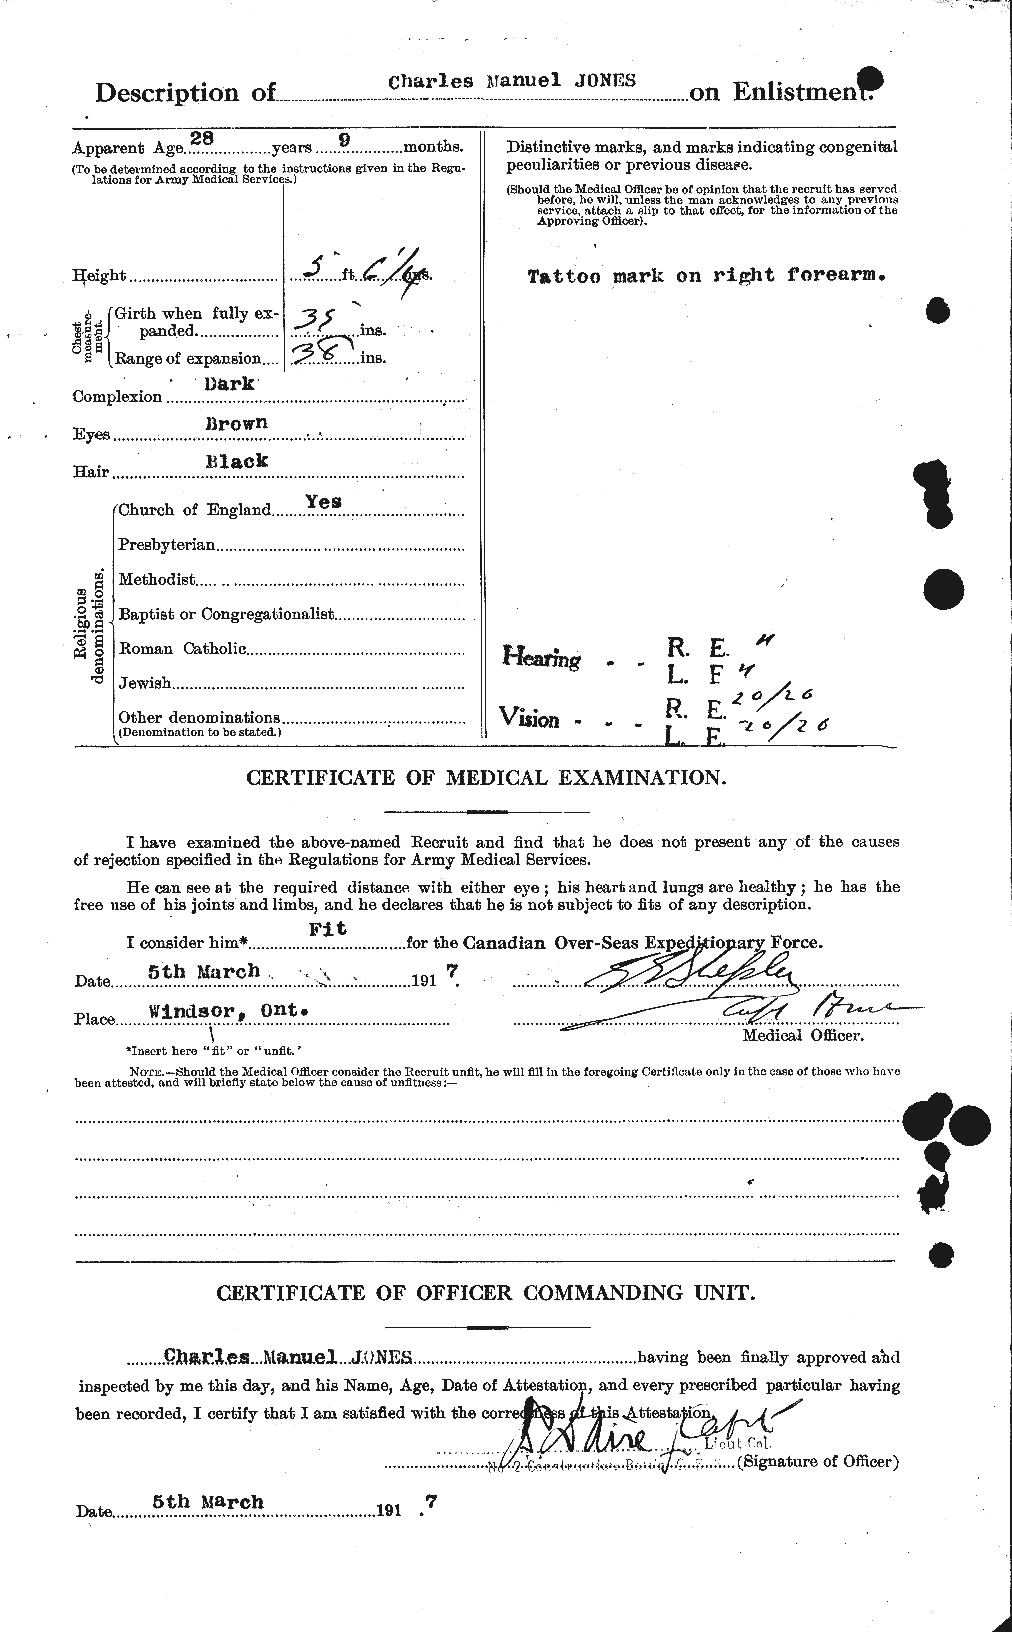 Personnel Records of the First World War - CEF 423859b